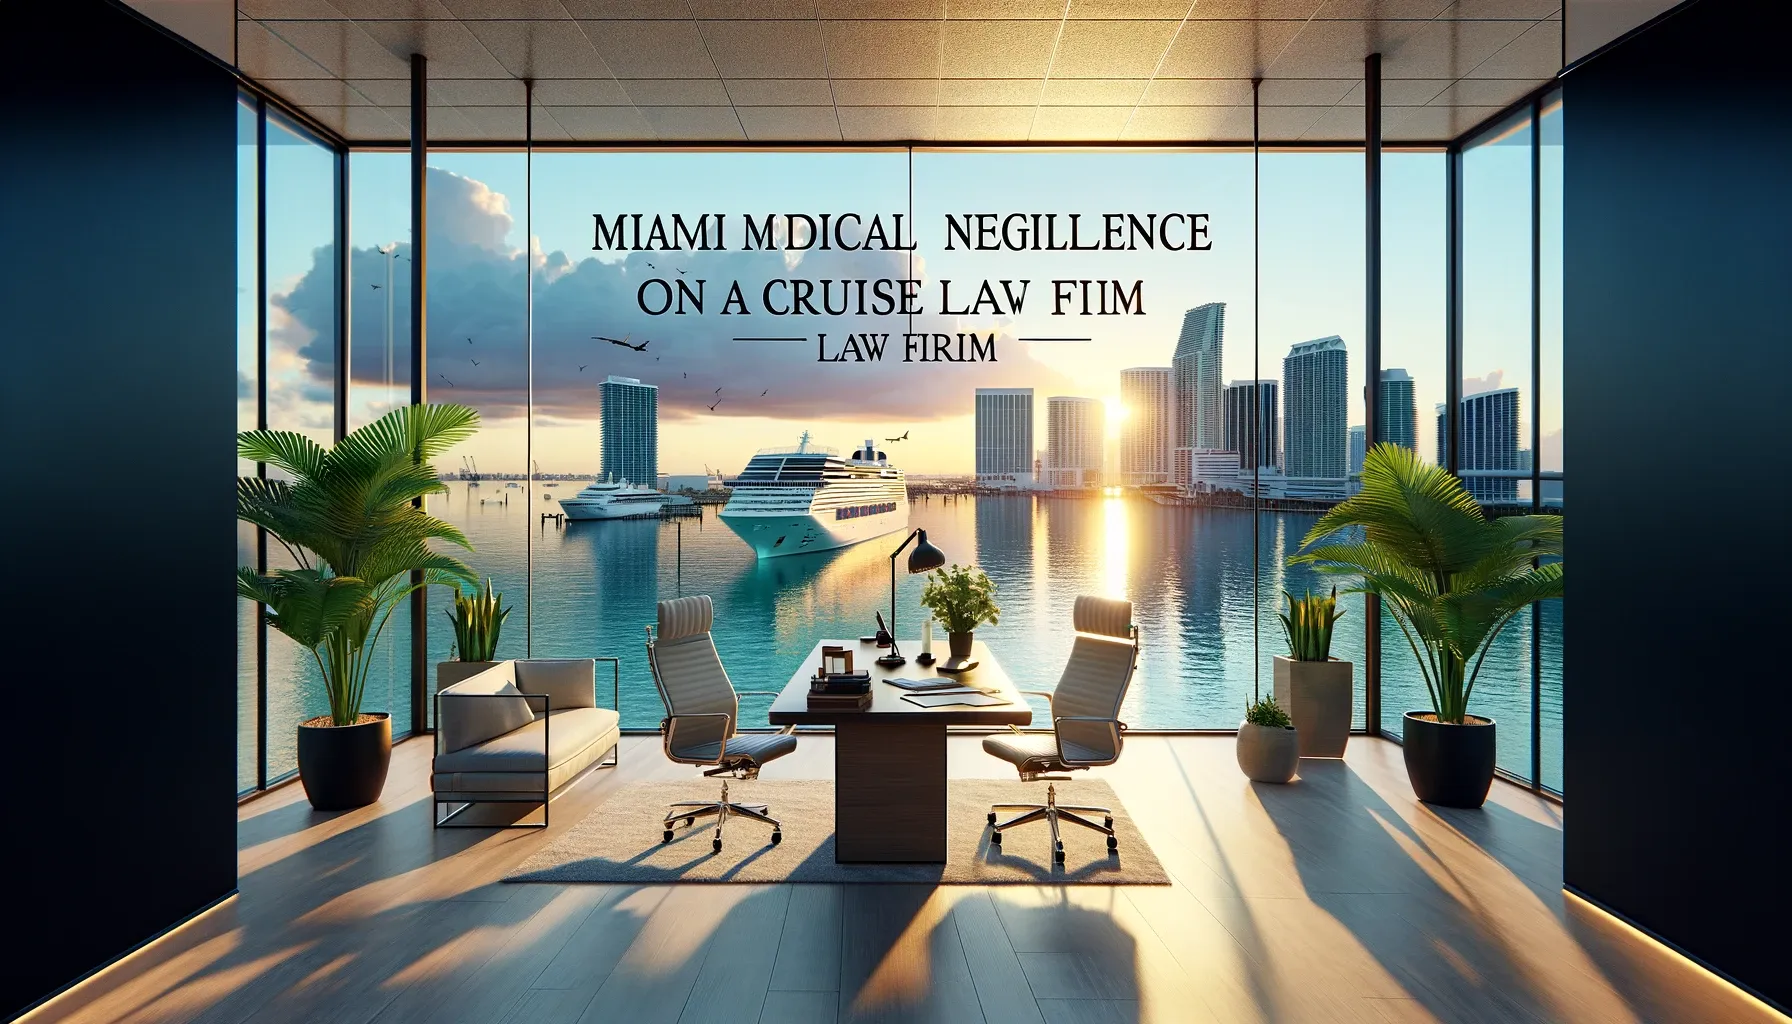 Miami Medical Negligence on a Cruise Law Firm